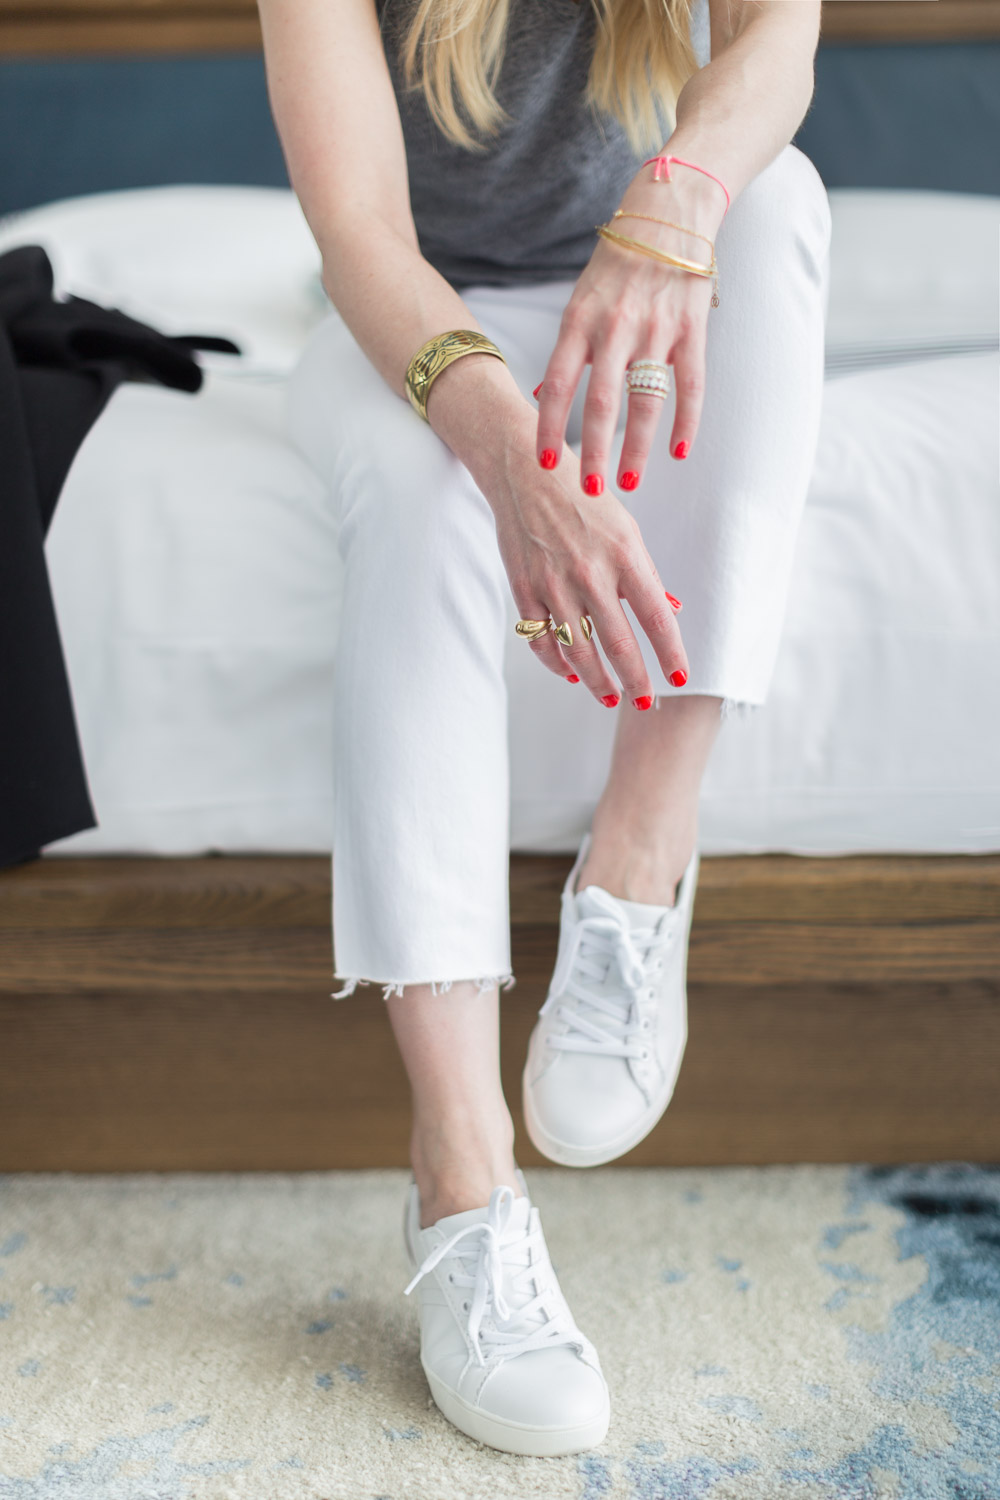 Alyssa Rosenheck The New Southern with Naturalizer - Speaker, Photographer, Cancer Survivor, lifestyle expert National Campaign in Nashville TN - Fall Travel Look  - White Jeans